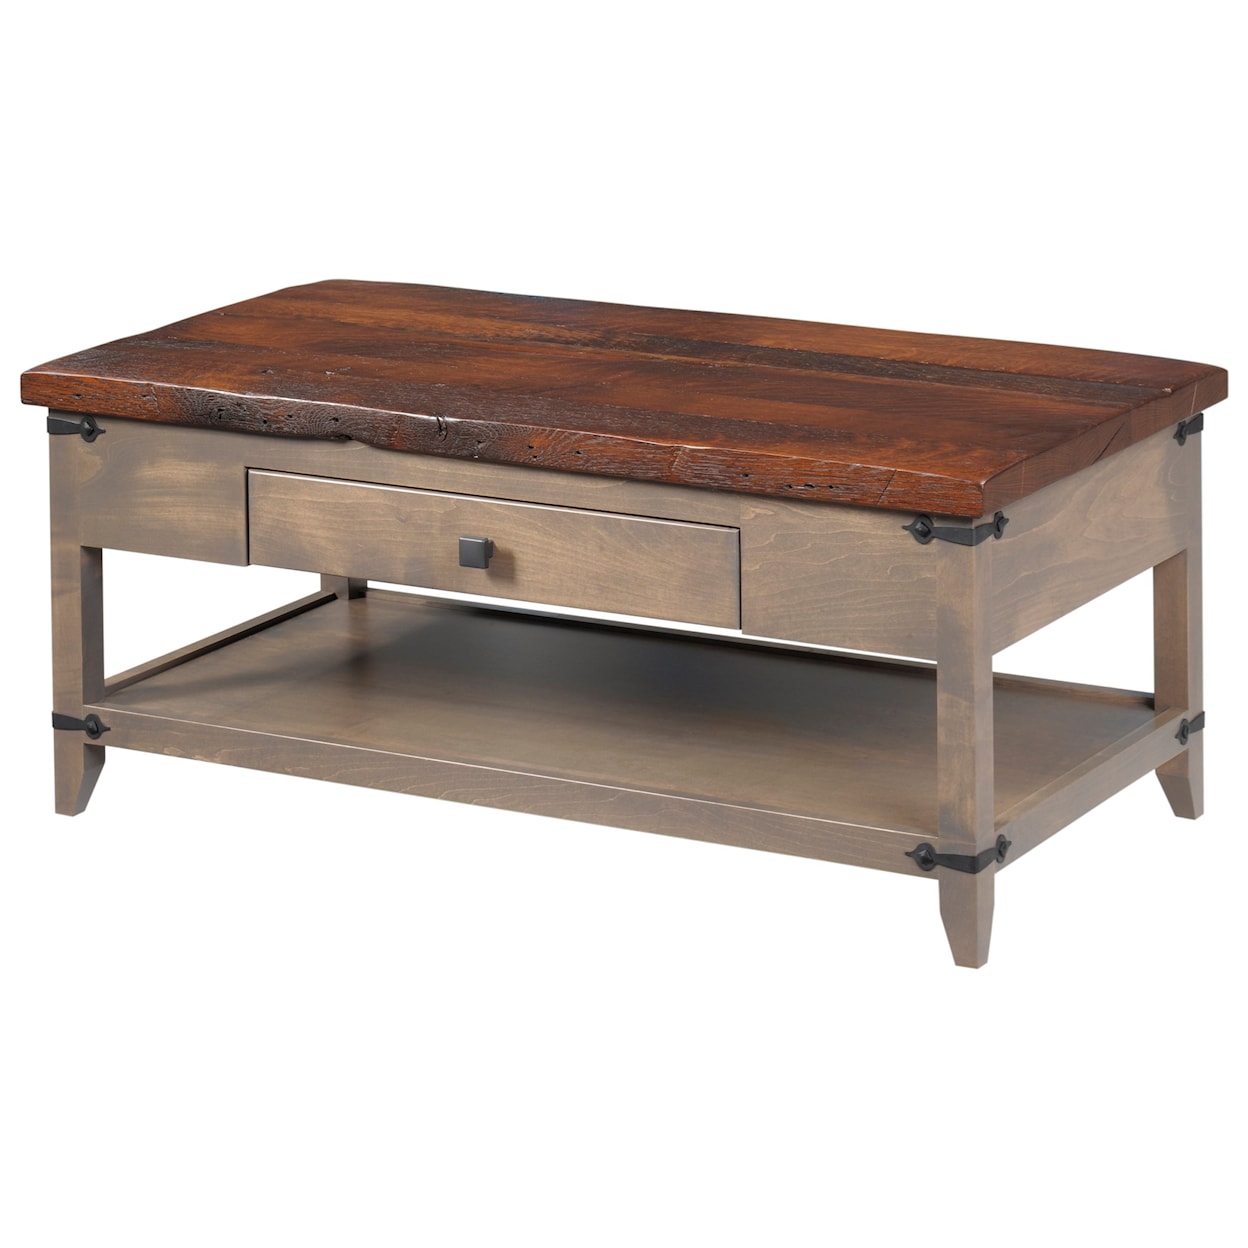 Y & T Woodcraft Frontier Coffee Table